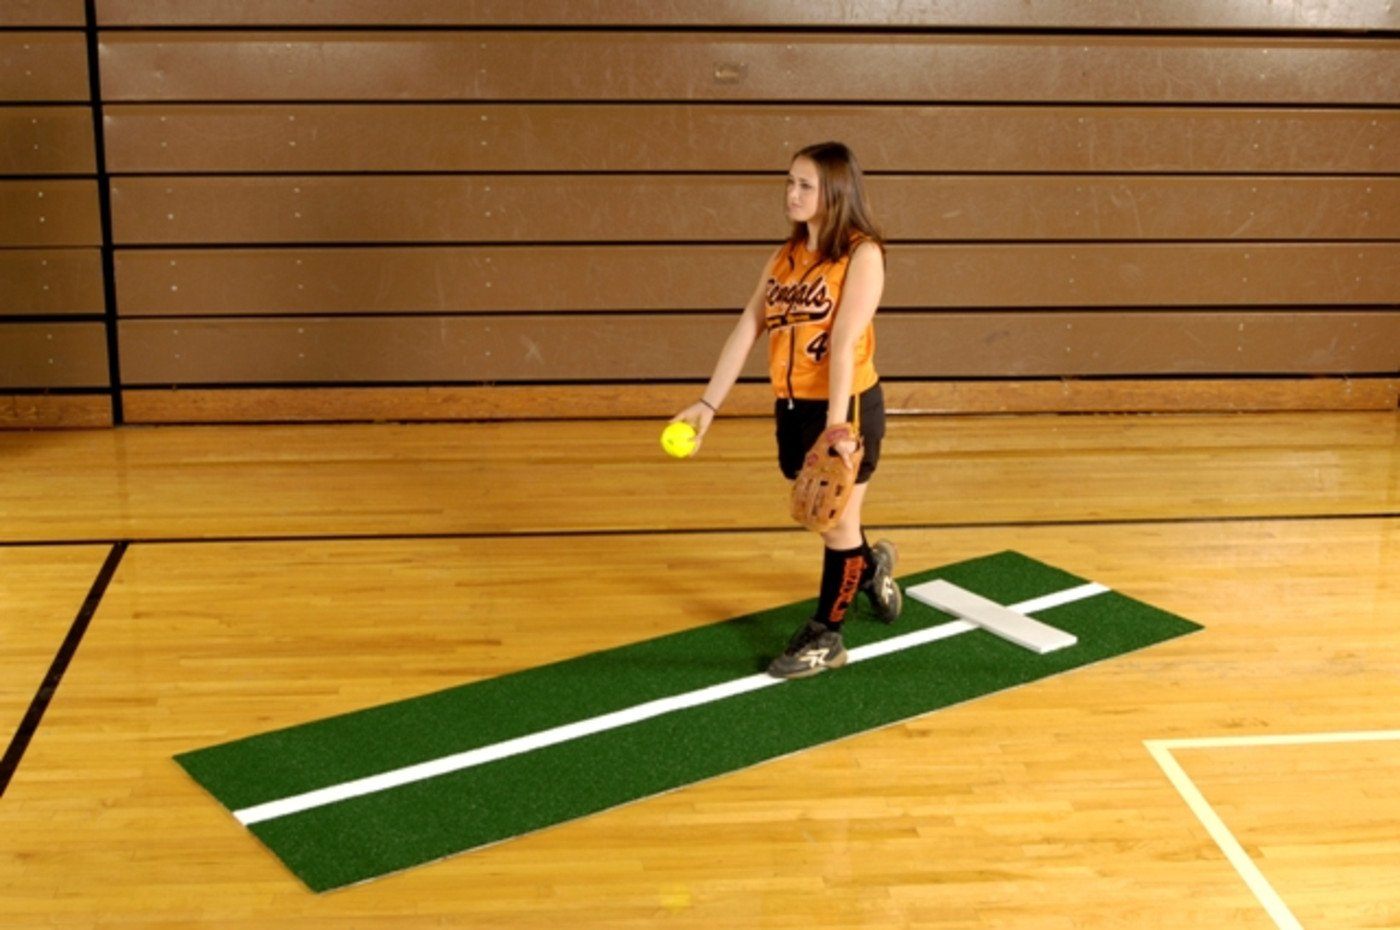 Softball Pitching Mat with Stride Line - 3' x 10'